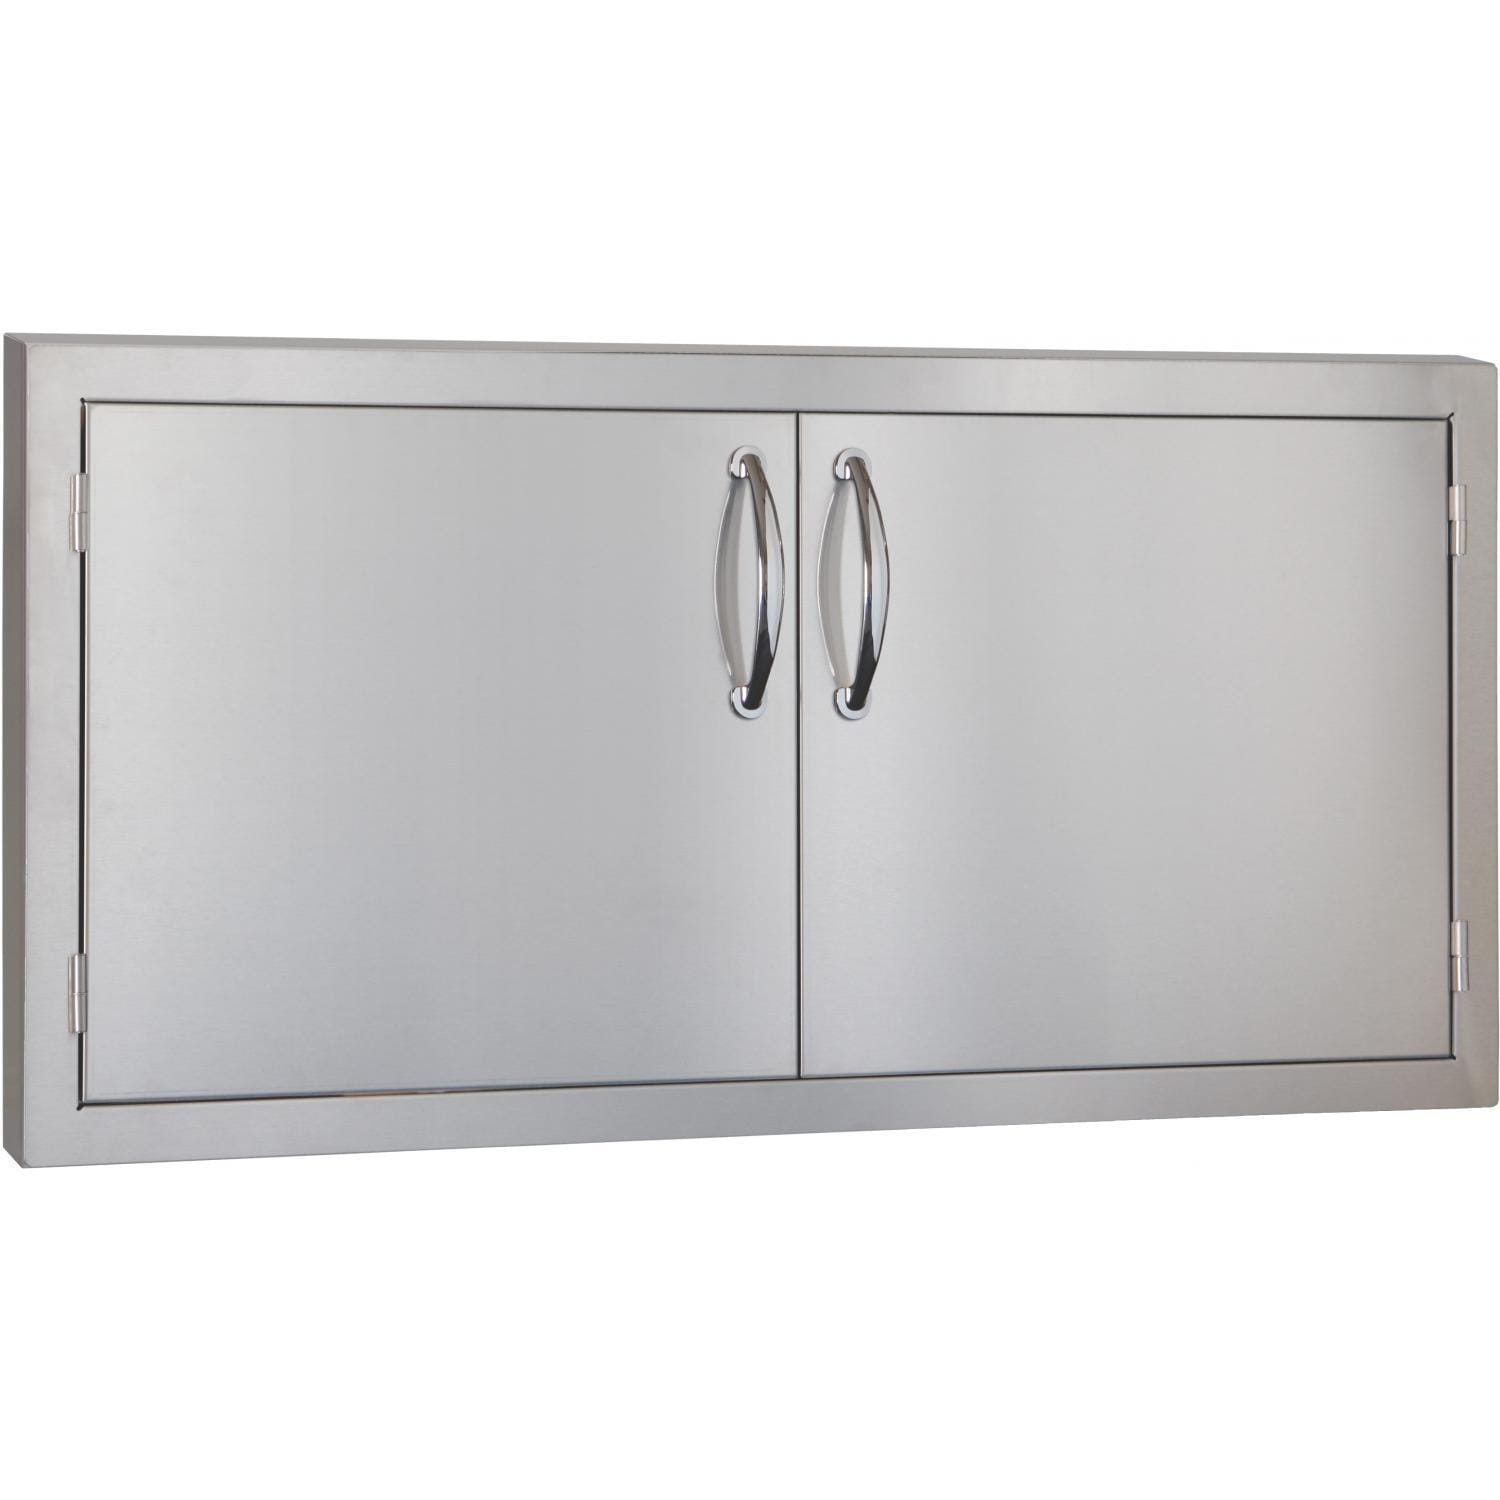 Summerset Grills Masonry Storage & Access Components Masonry Door, Double - 45" Stainless Steel with Masonry Frame Return